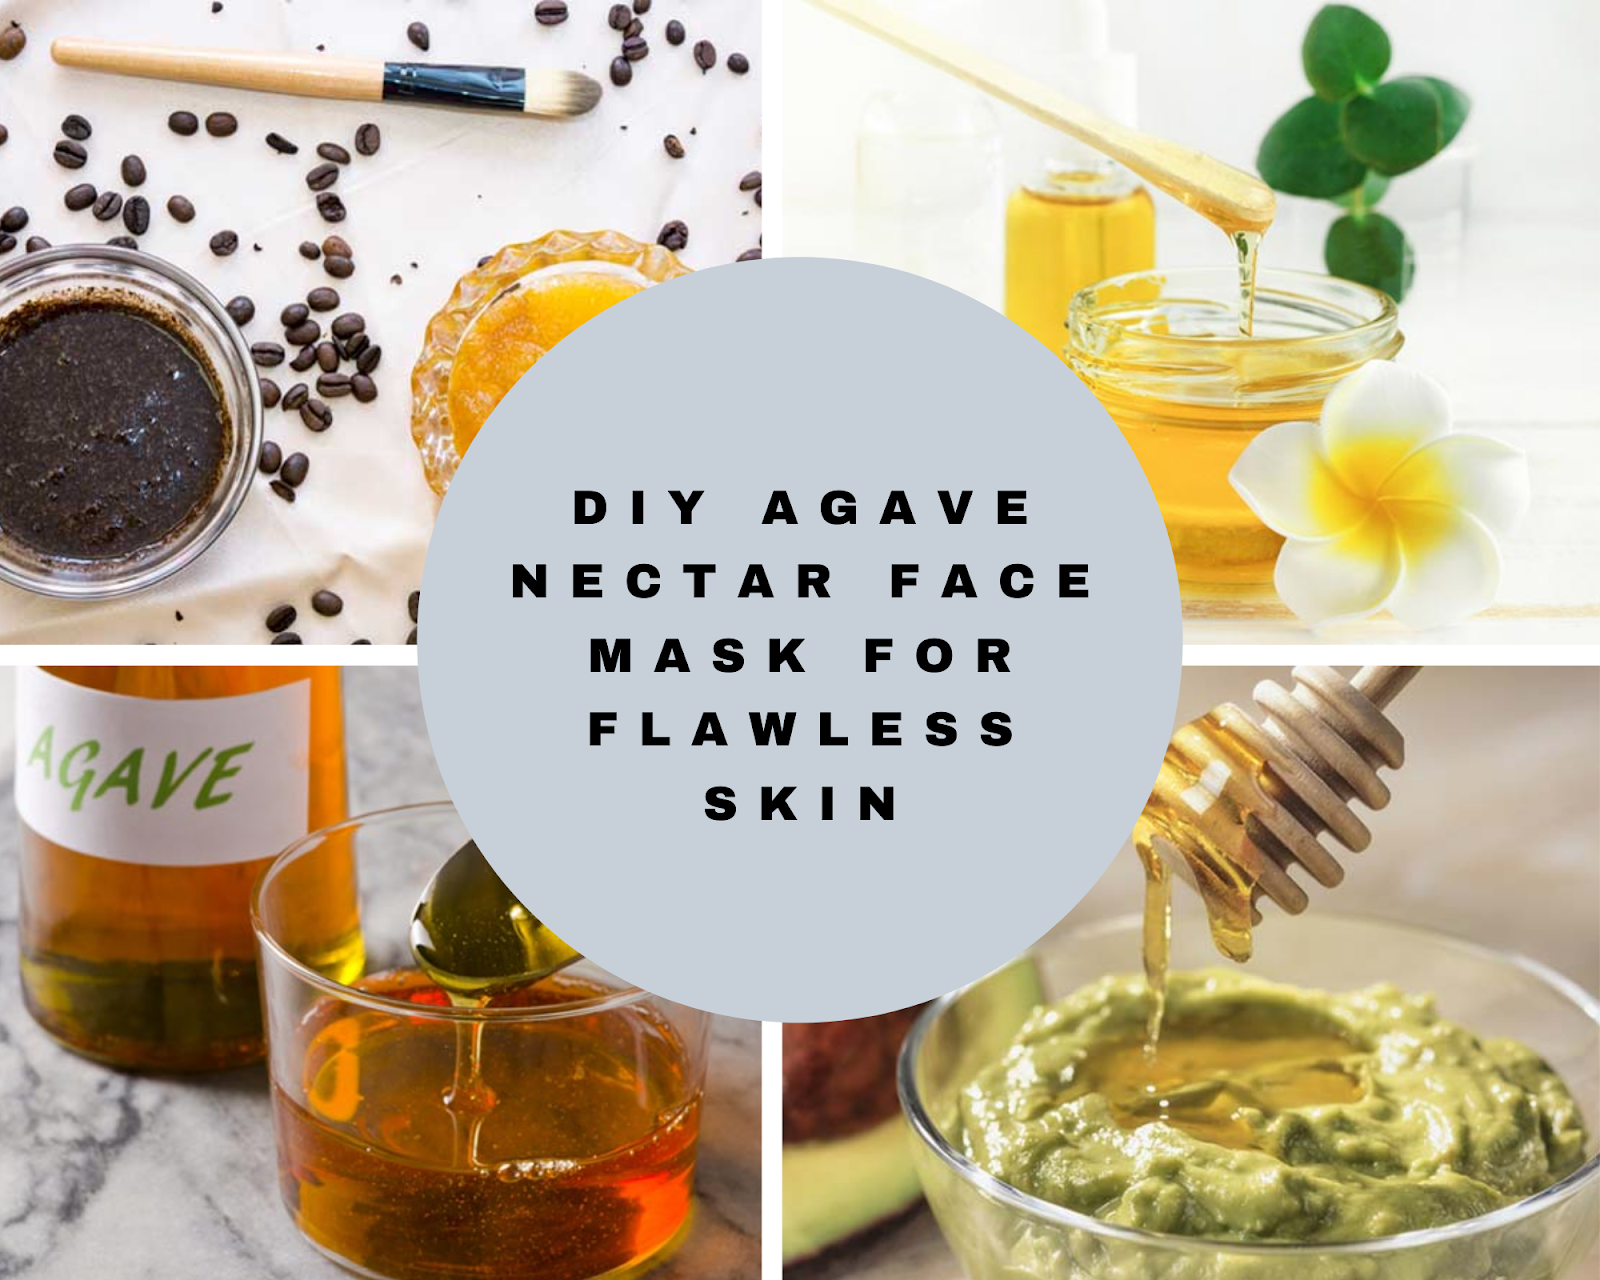 3. DIY Hair Mask Recipes with Blue Agave Nectar - wide 4